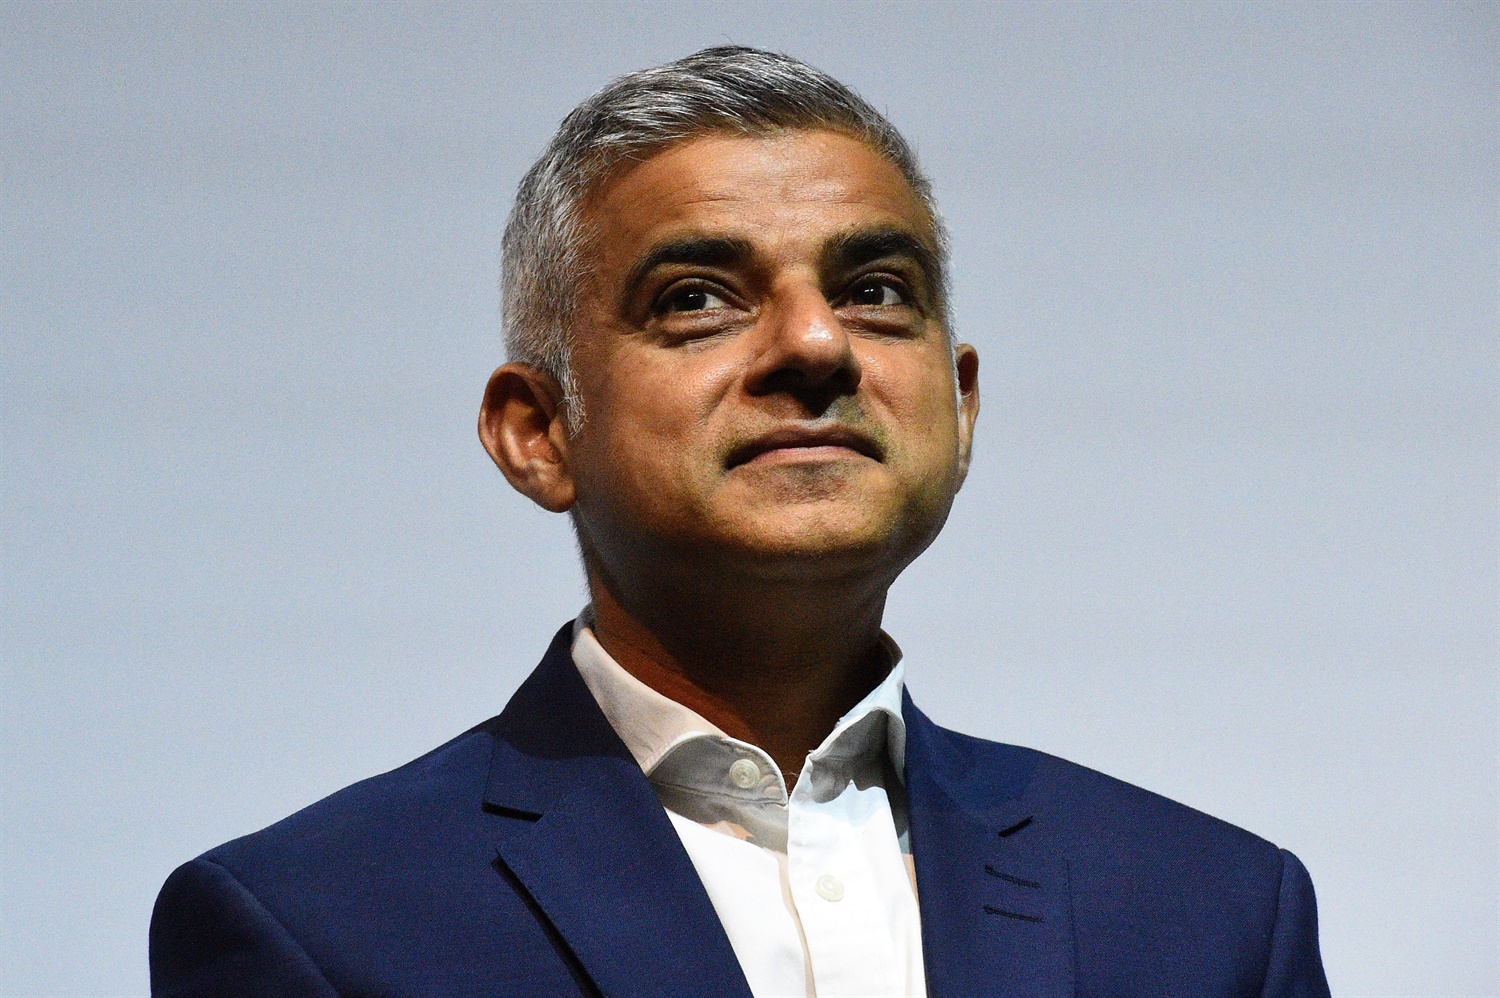 Crossrail: Khan commissions report into governance, says he ‘cannot be sure’ of completion date